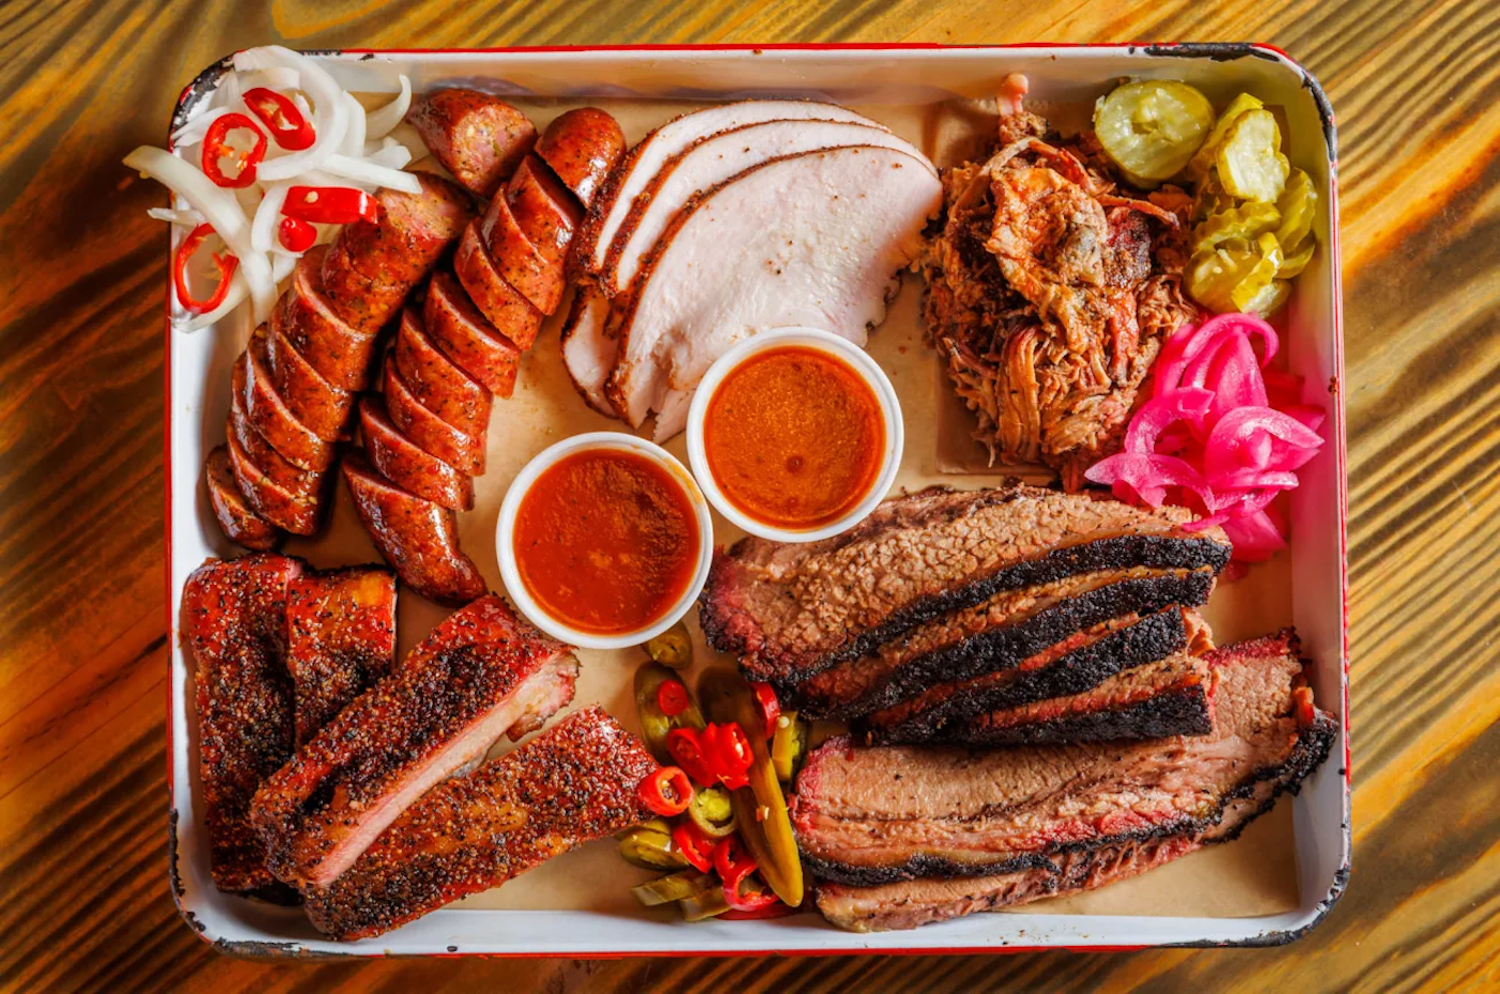 BBQ tray with meat, sauces and other sides 